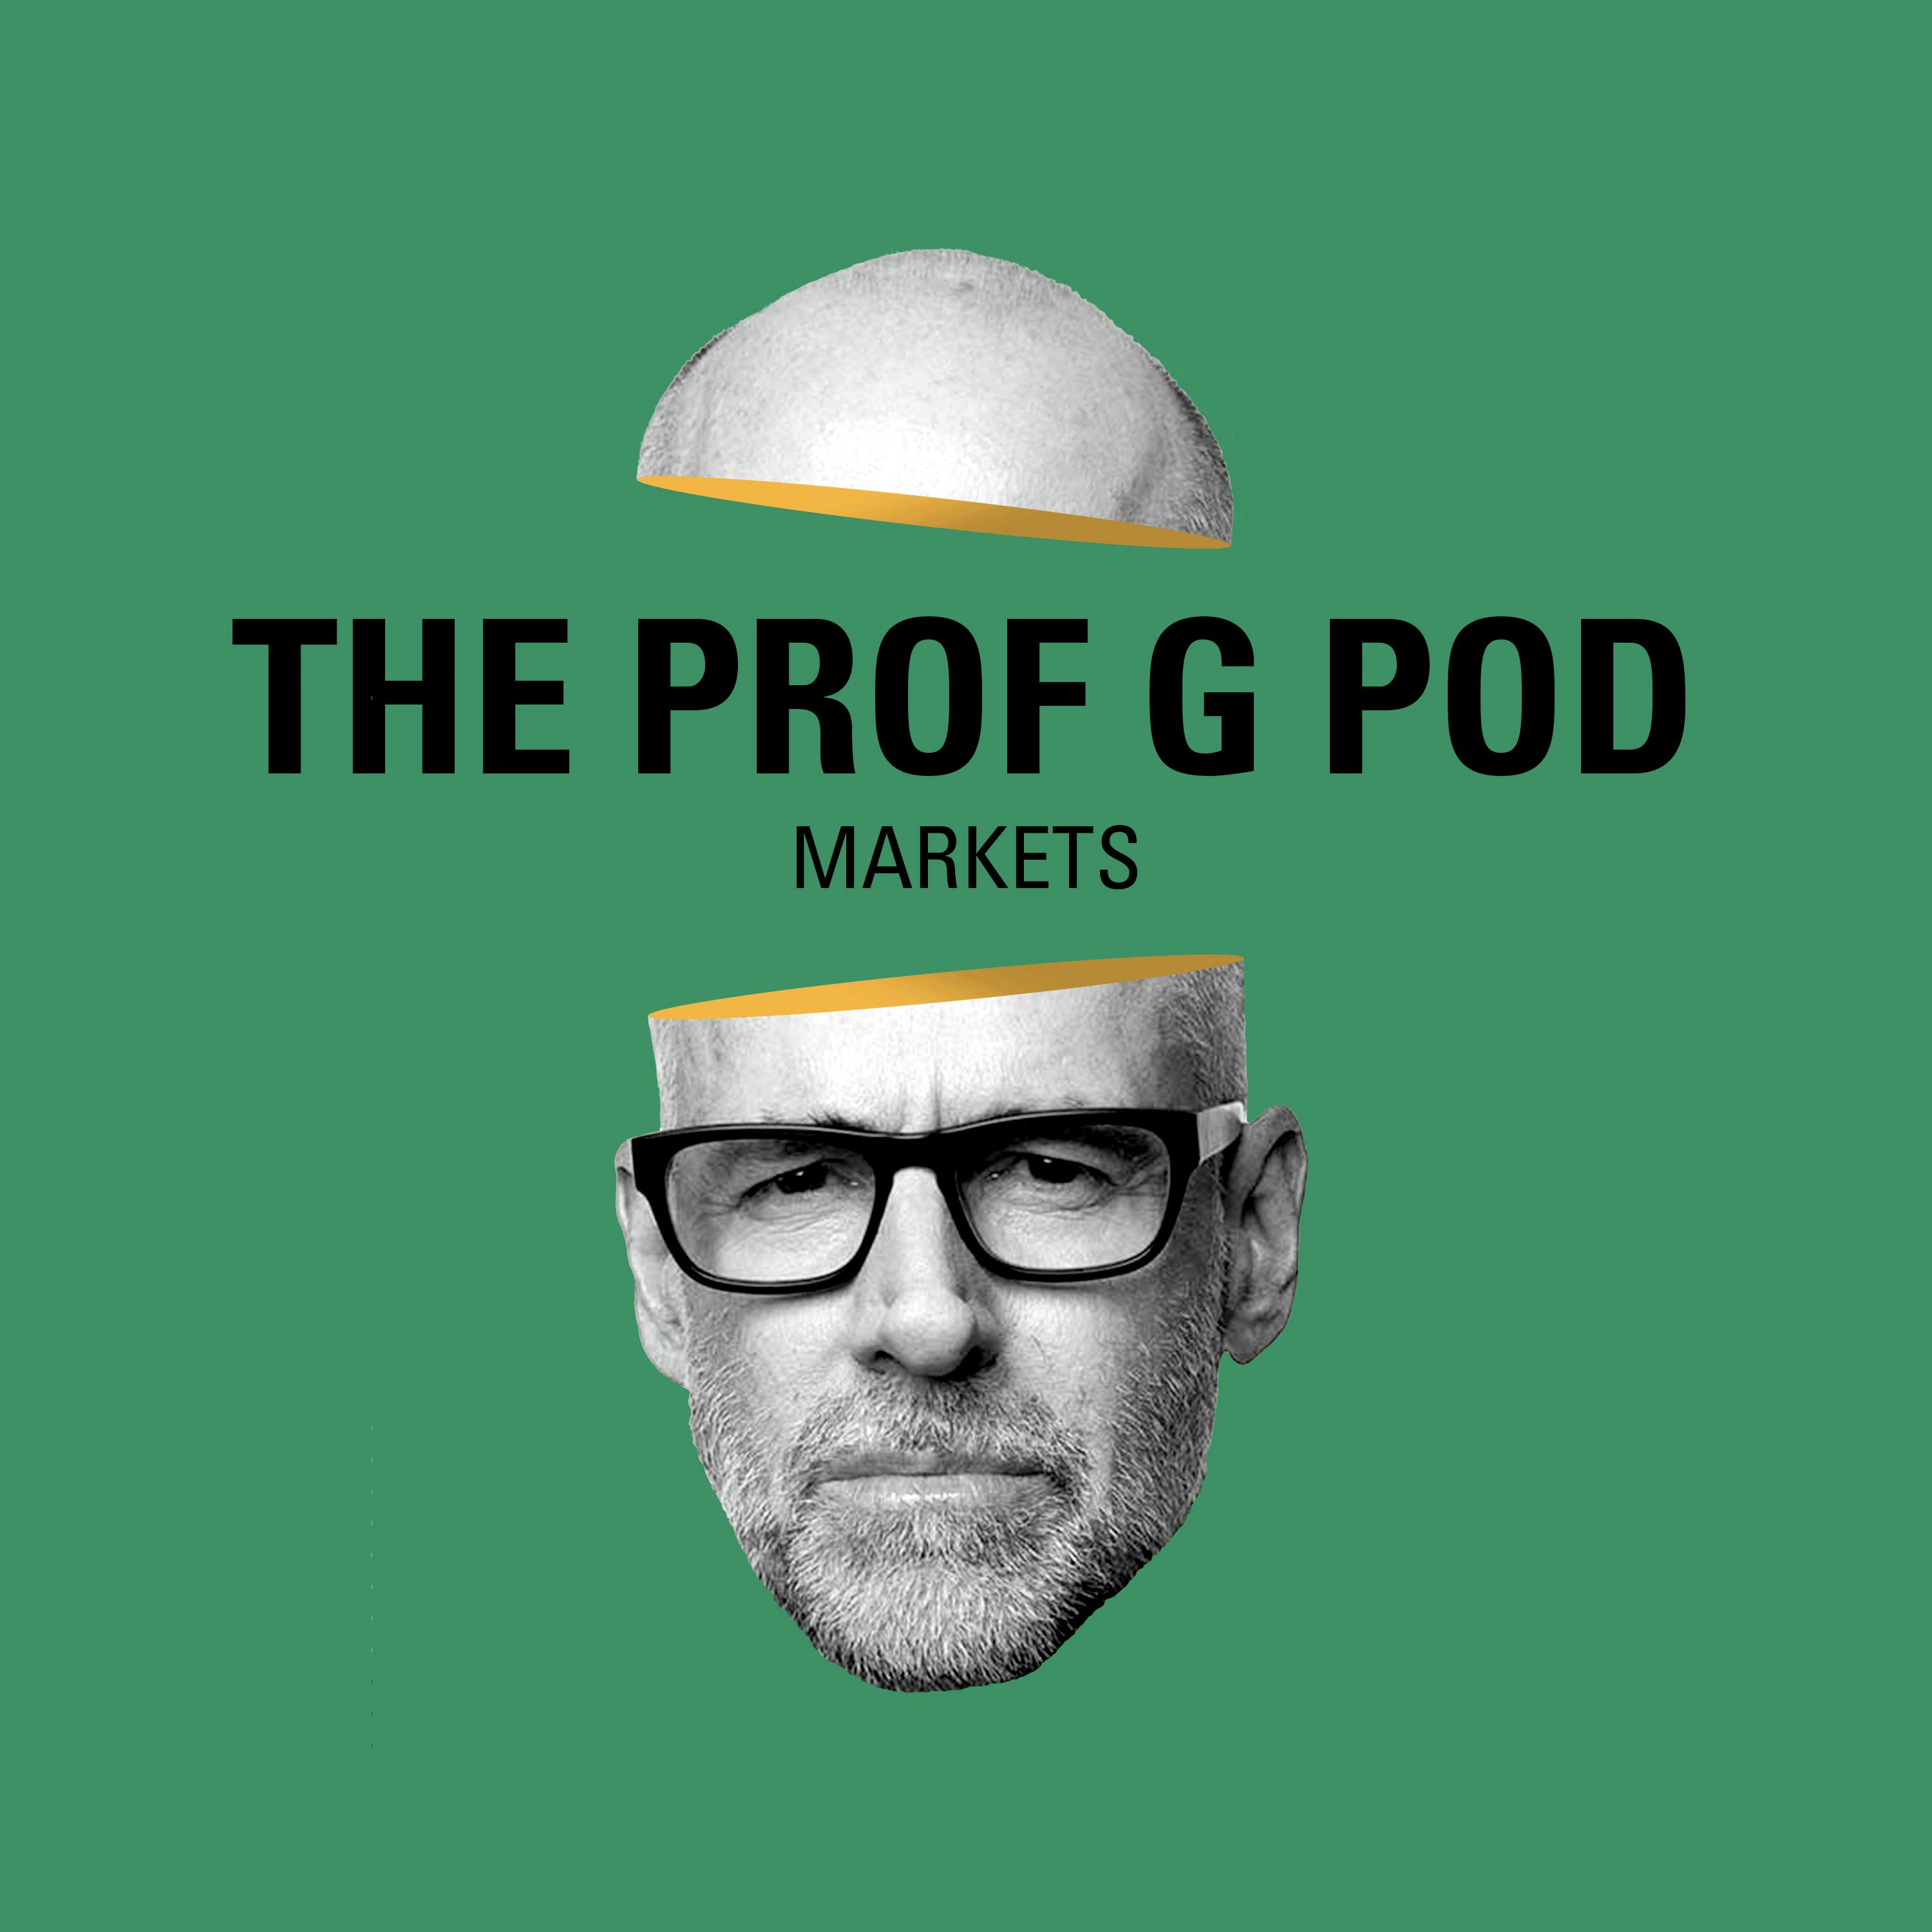 Prof G Markets: Elon sells Tesla (stock), the Inflation Reduction Act, Coinbase and Stock-based compensation by Vox Media Podcast Network